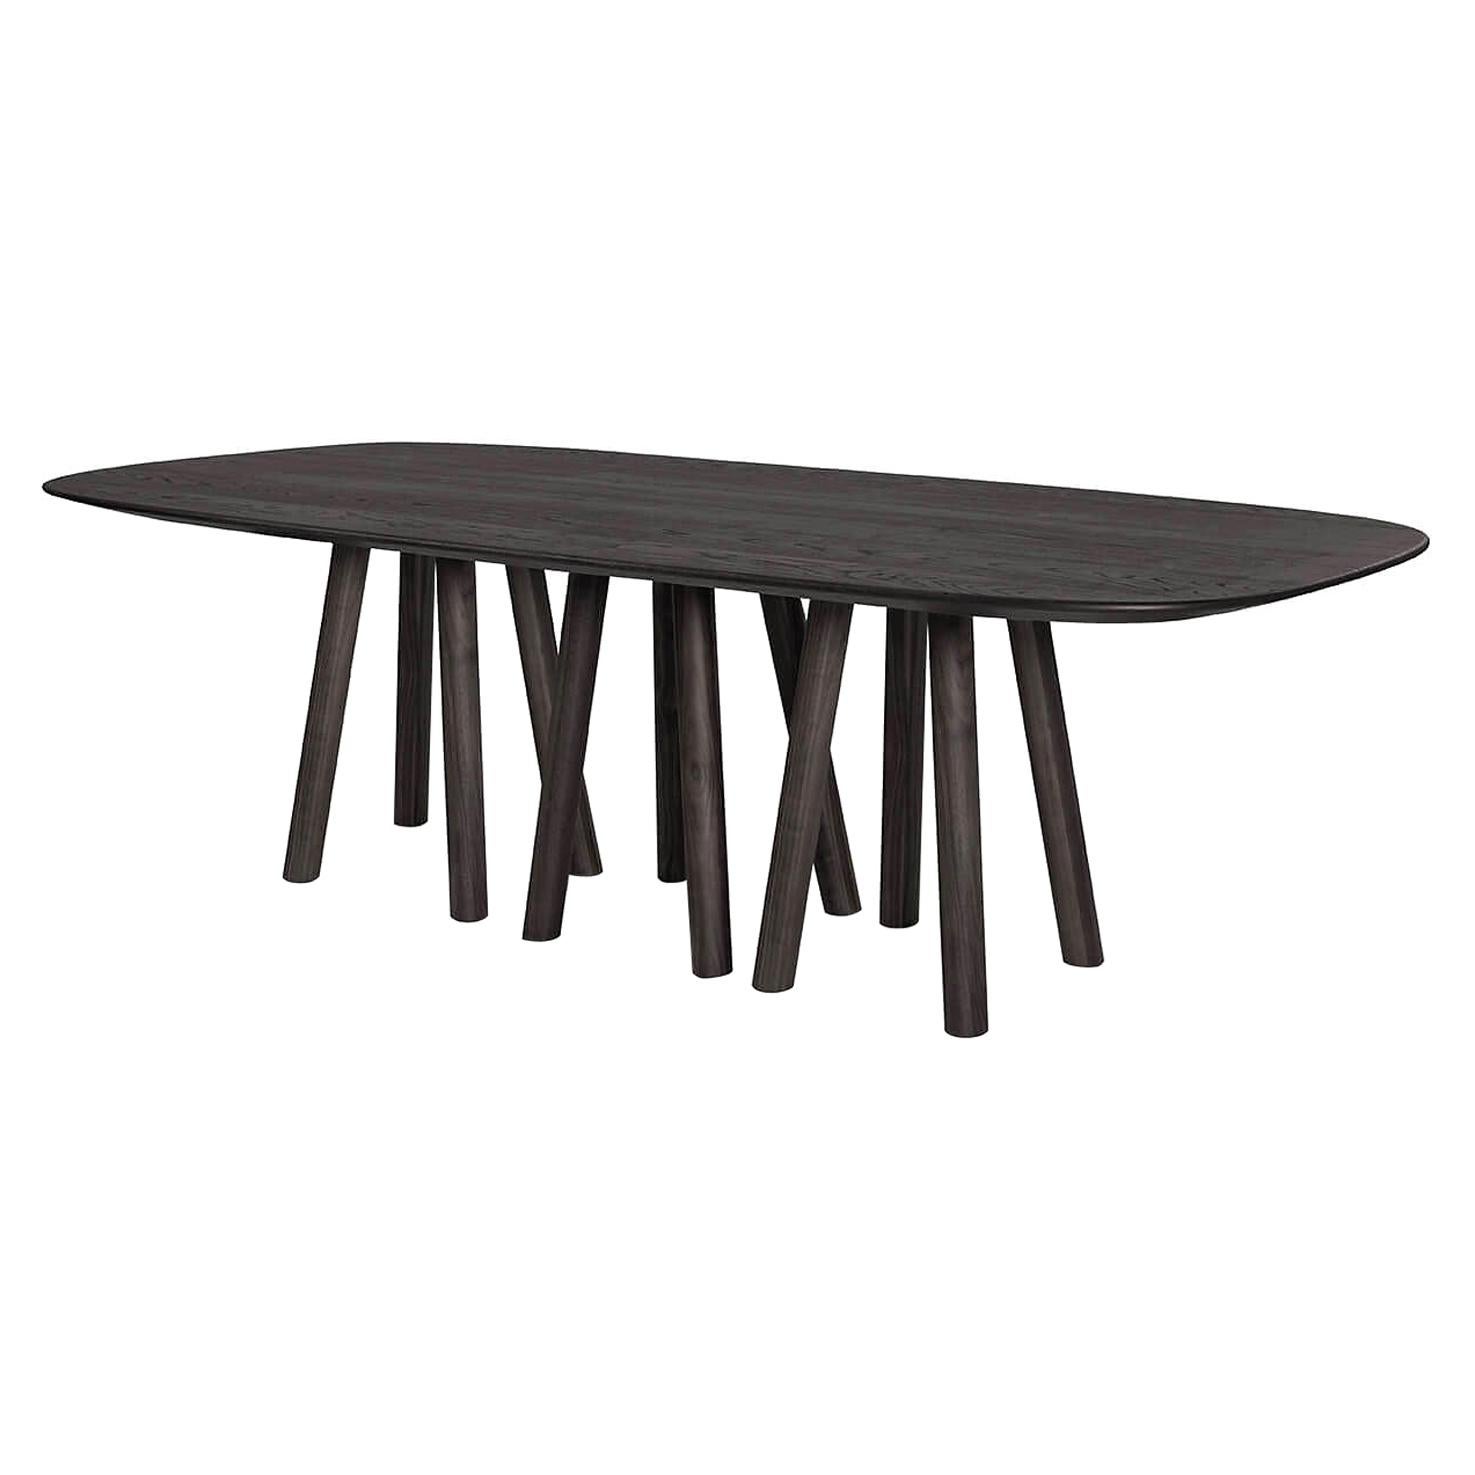 Caterpillar Dining Table Featuring 12 Legs, Blackened Solid Oak.